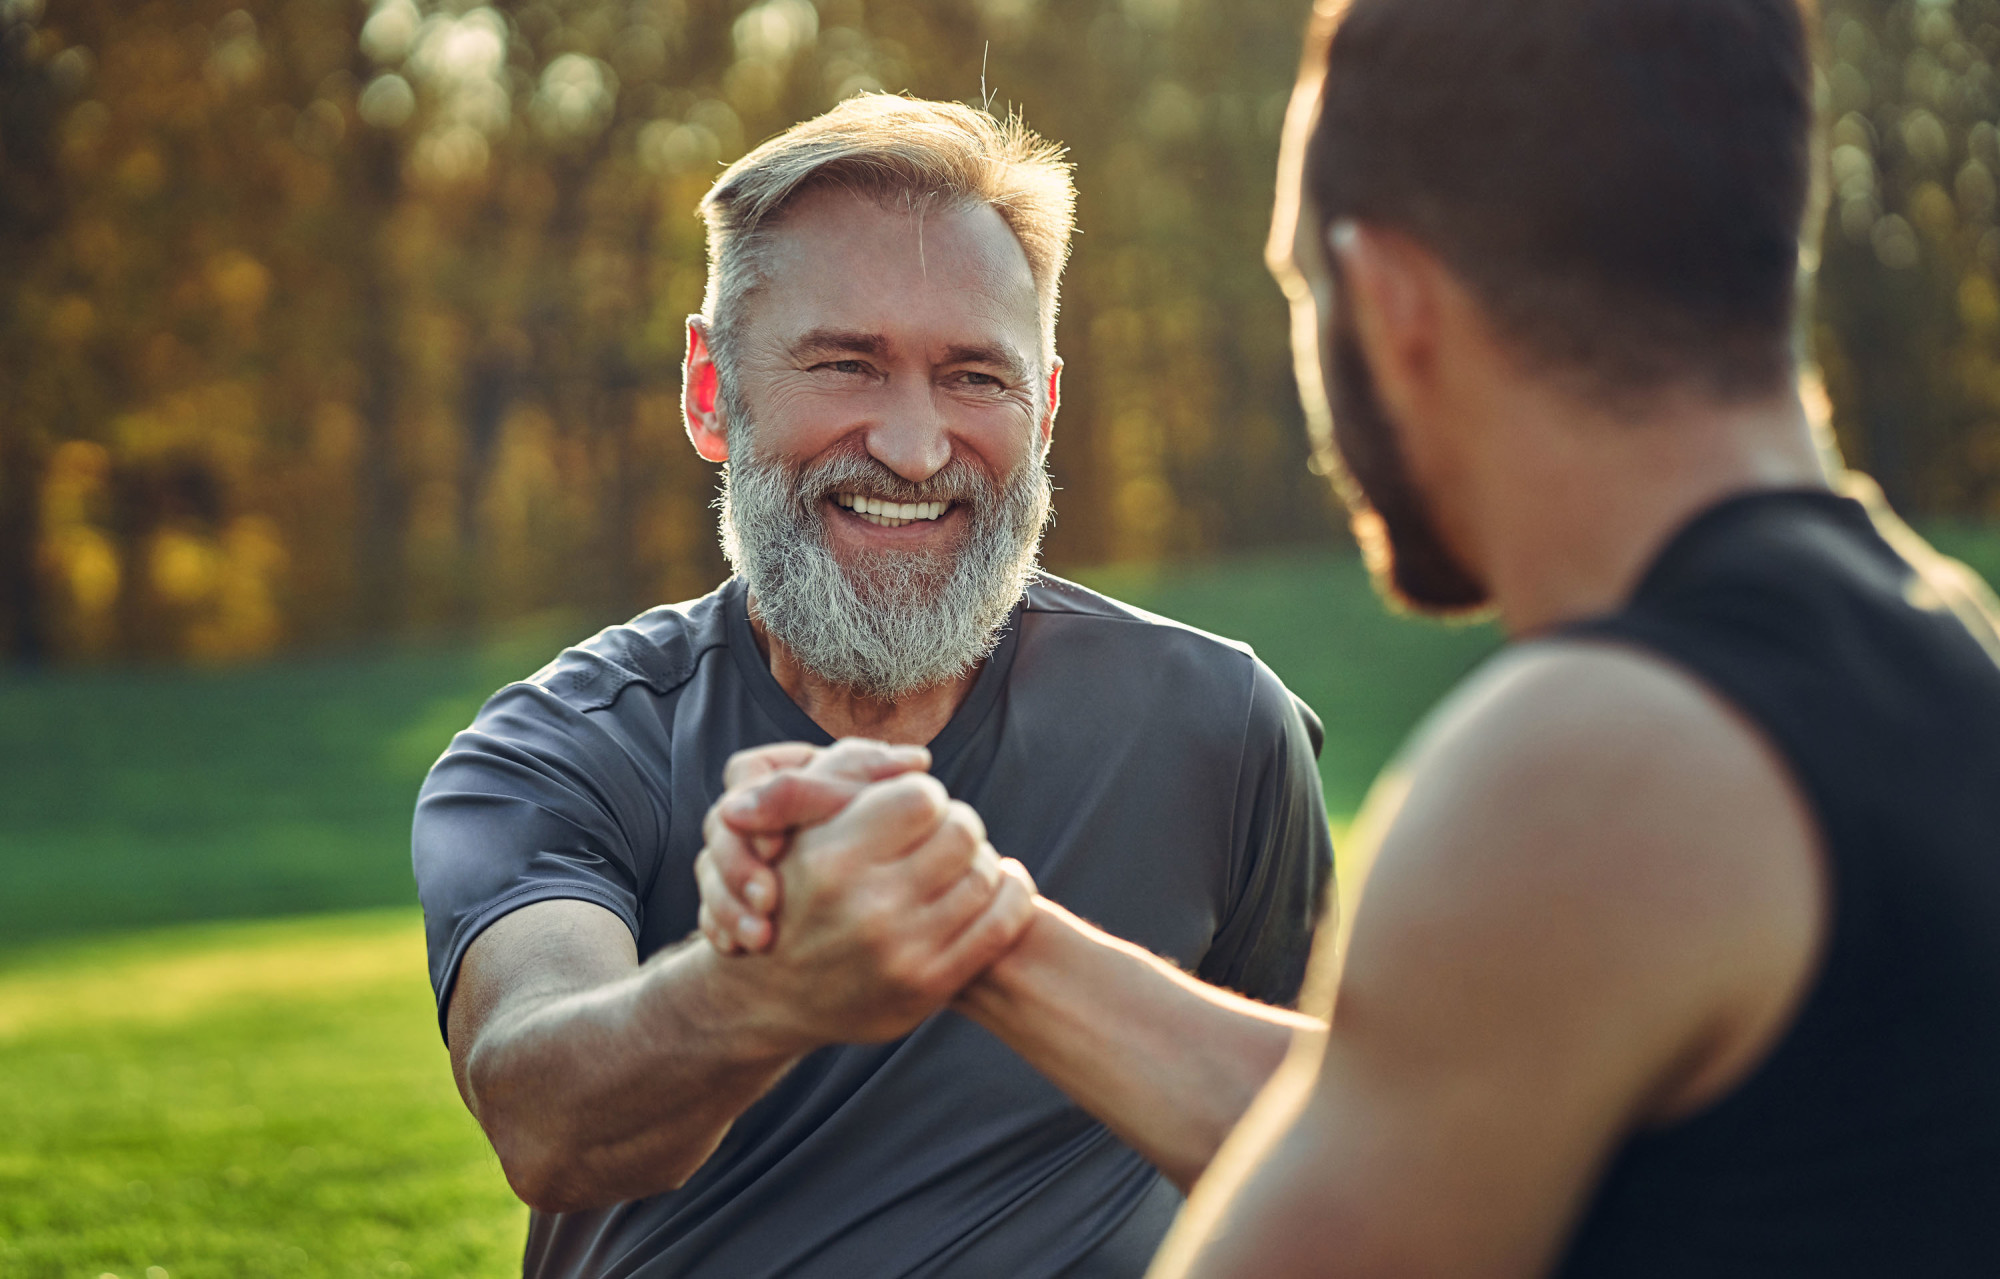 Two men shaking hands while working out